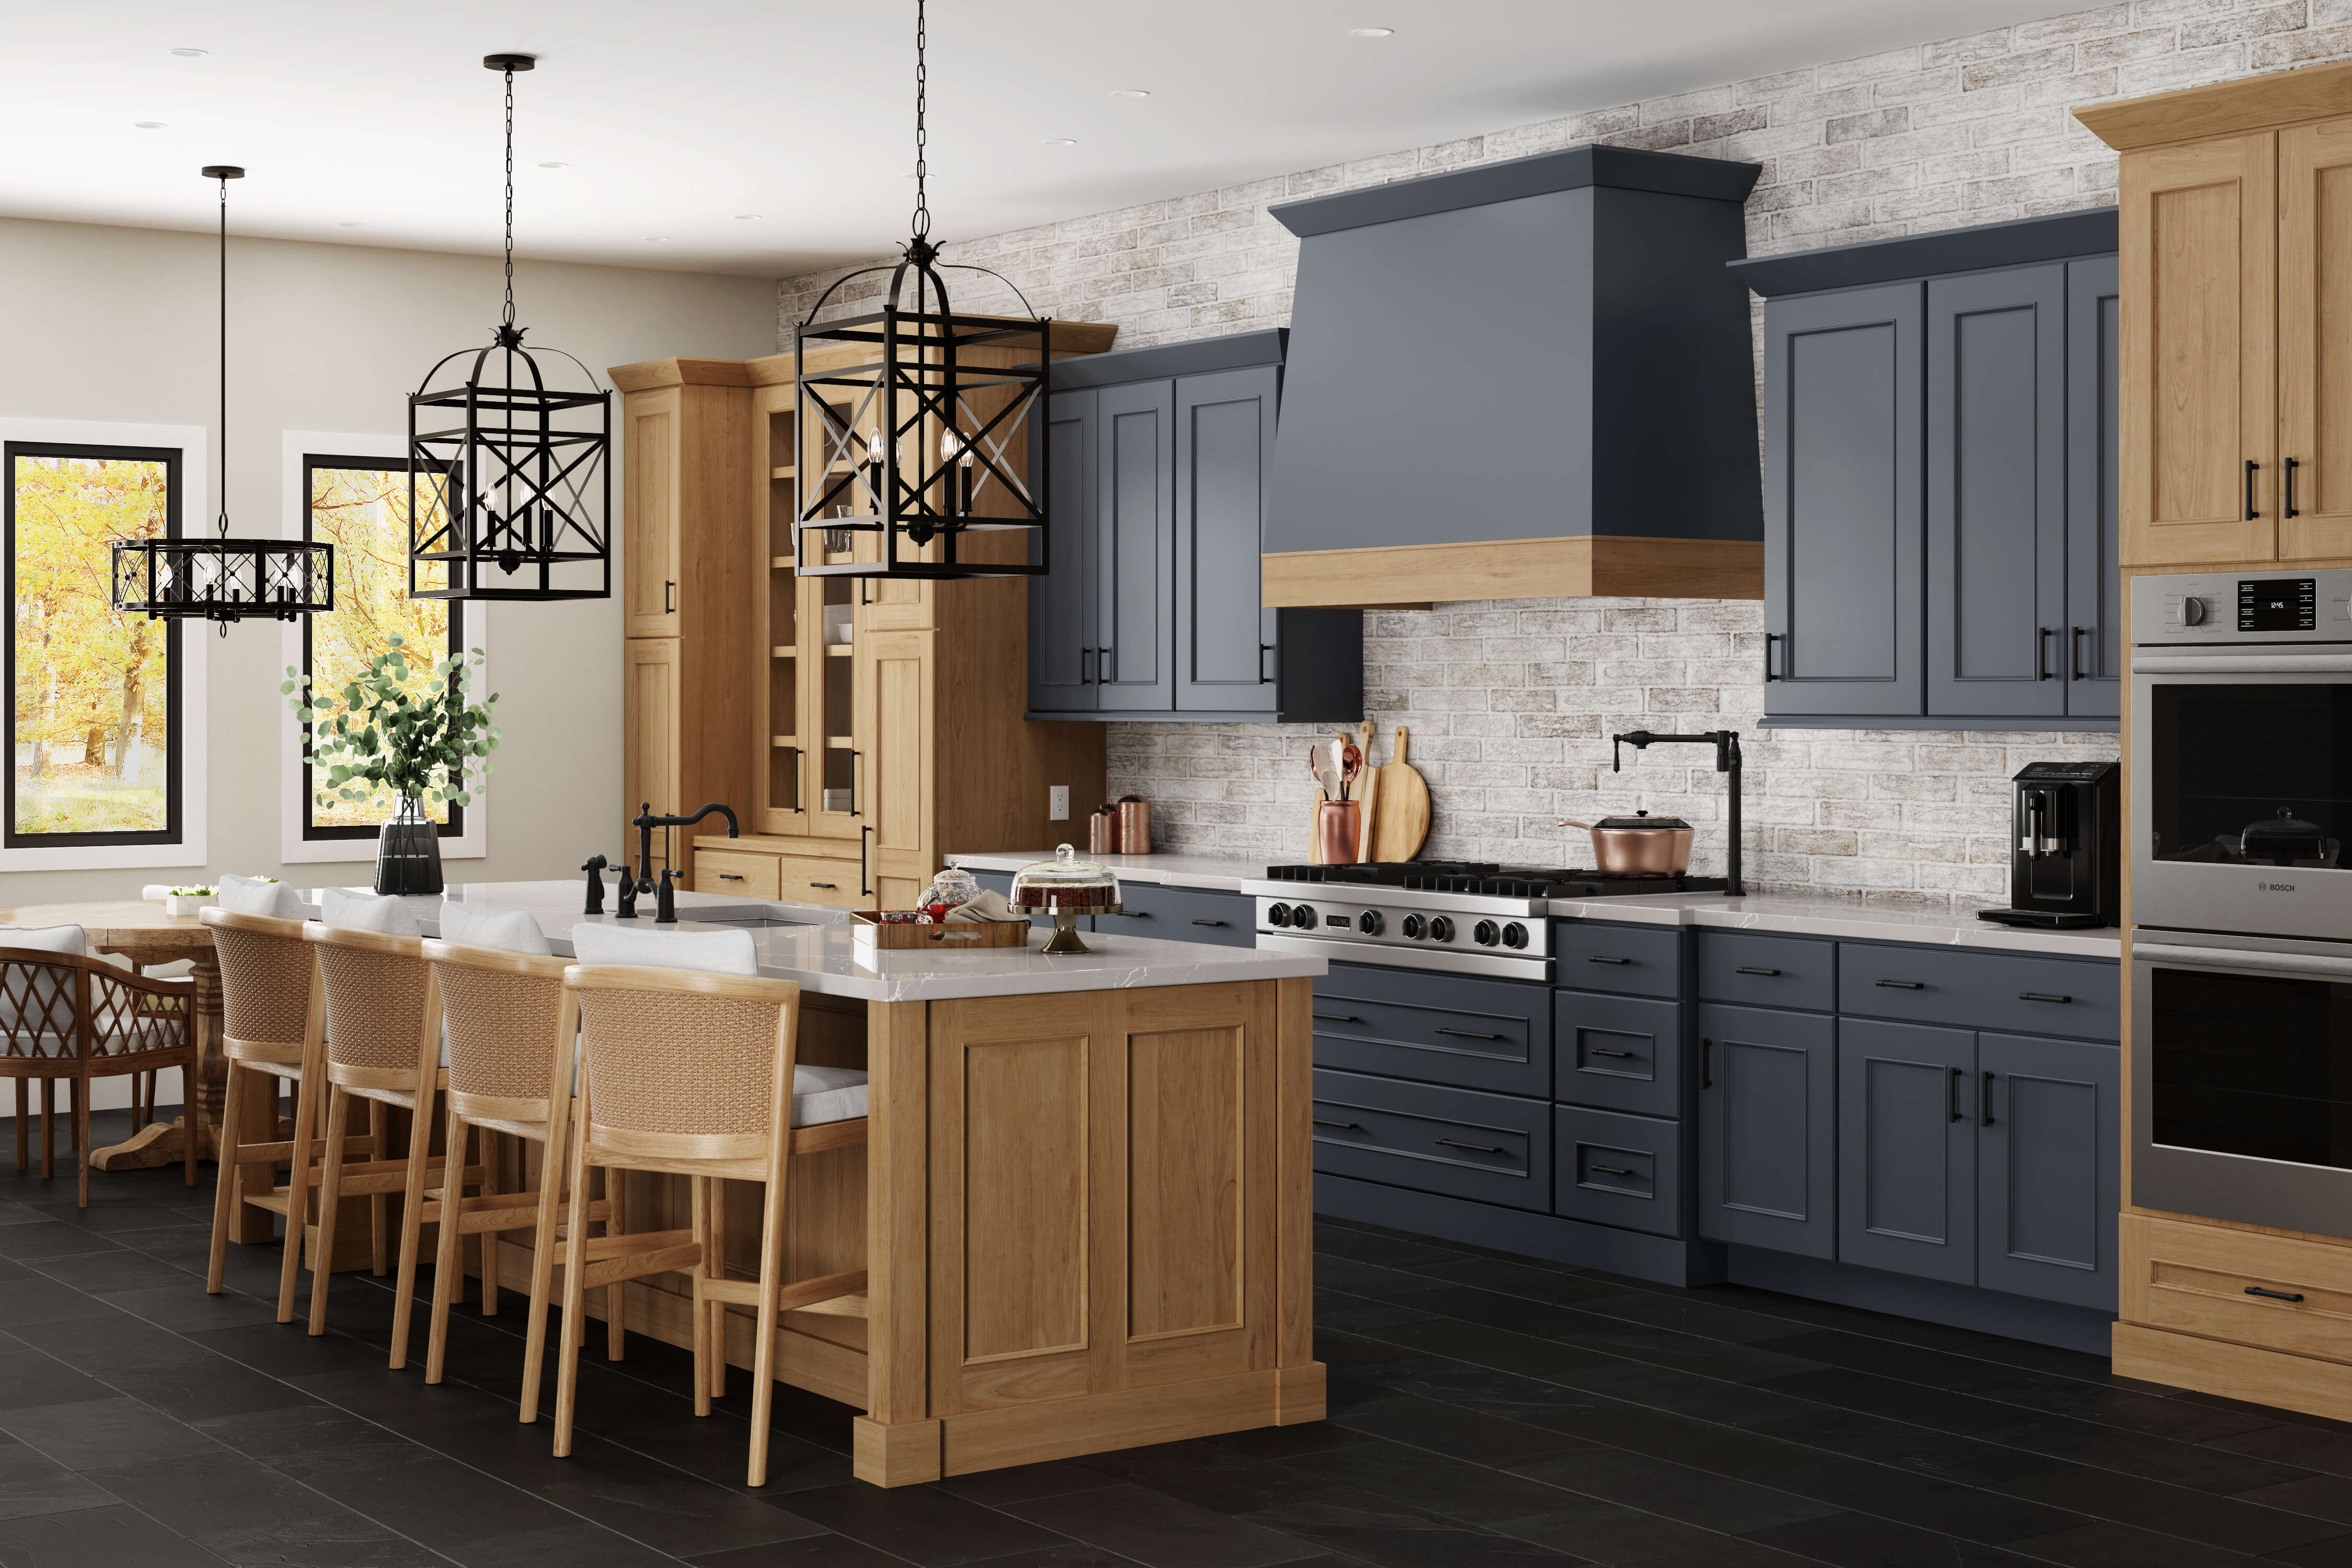 A remodeled kitchen with a modern take on the Old English interior design style. This design features deep blackish navy blue painted cabinets around the cooking space and on the wood hood surrounded by light stained cherry cabinets and wood accents. The kitchen cabinets use a framed construction method with full overlay door that have a flat panel style.